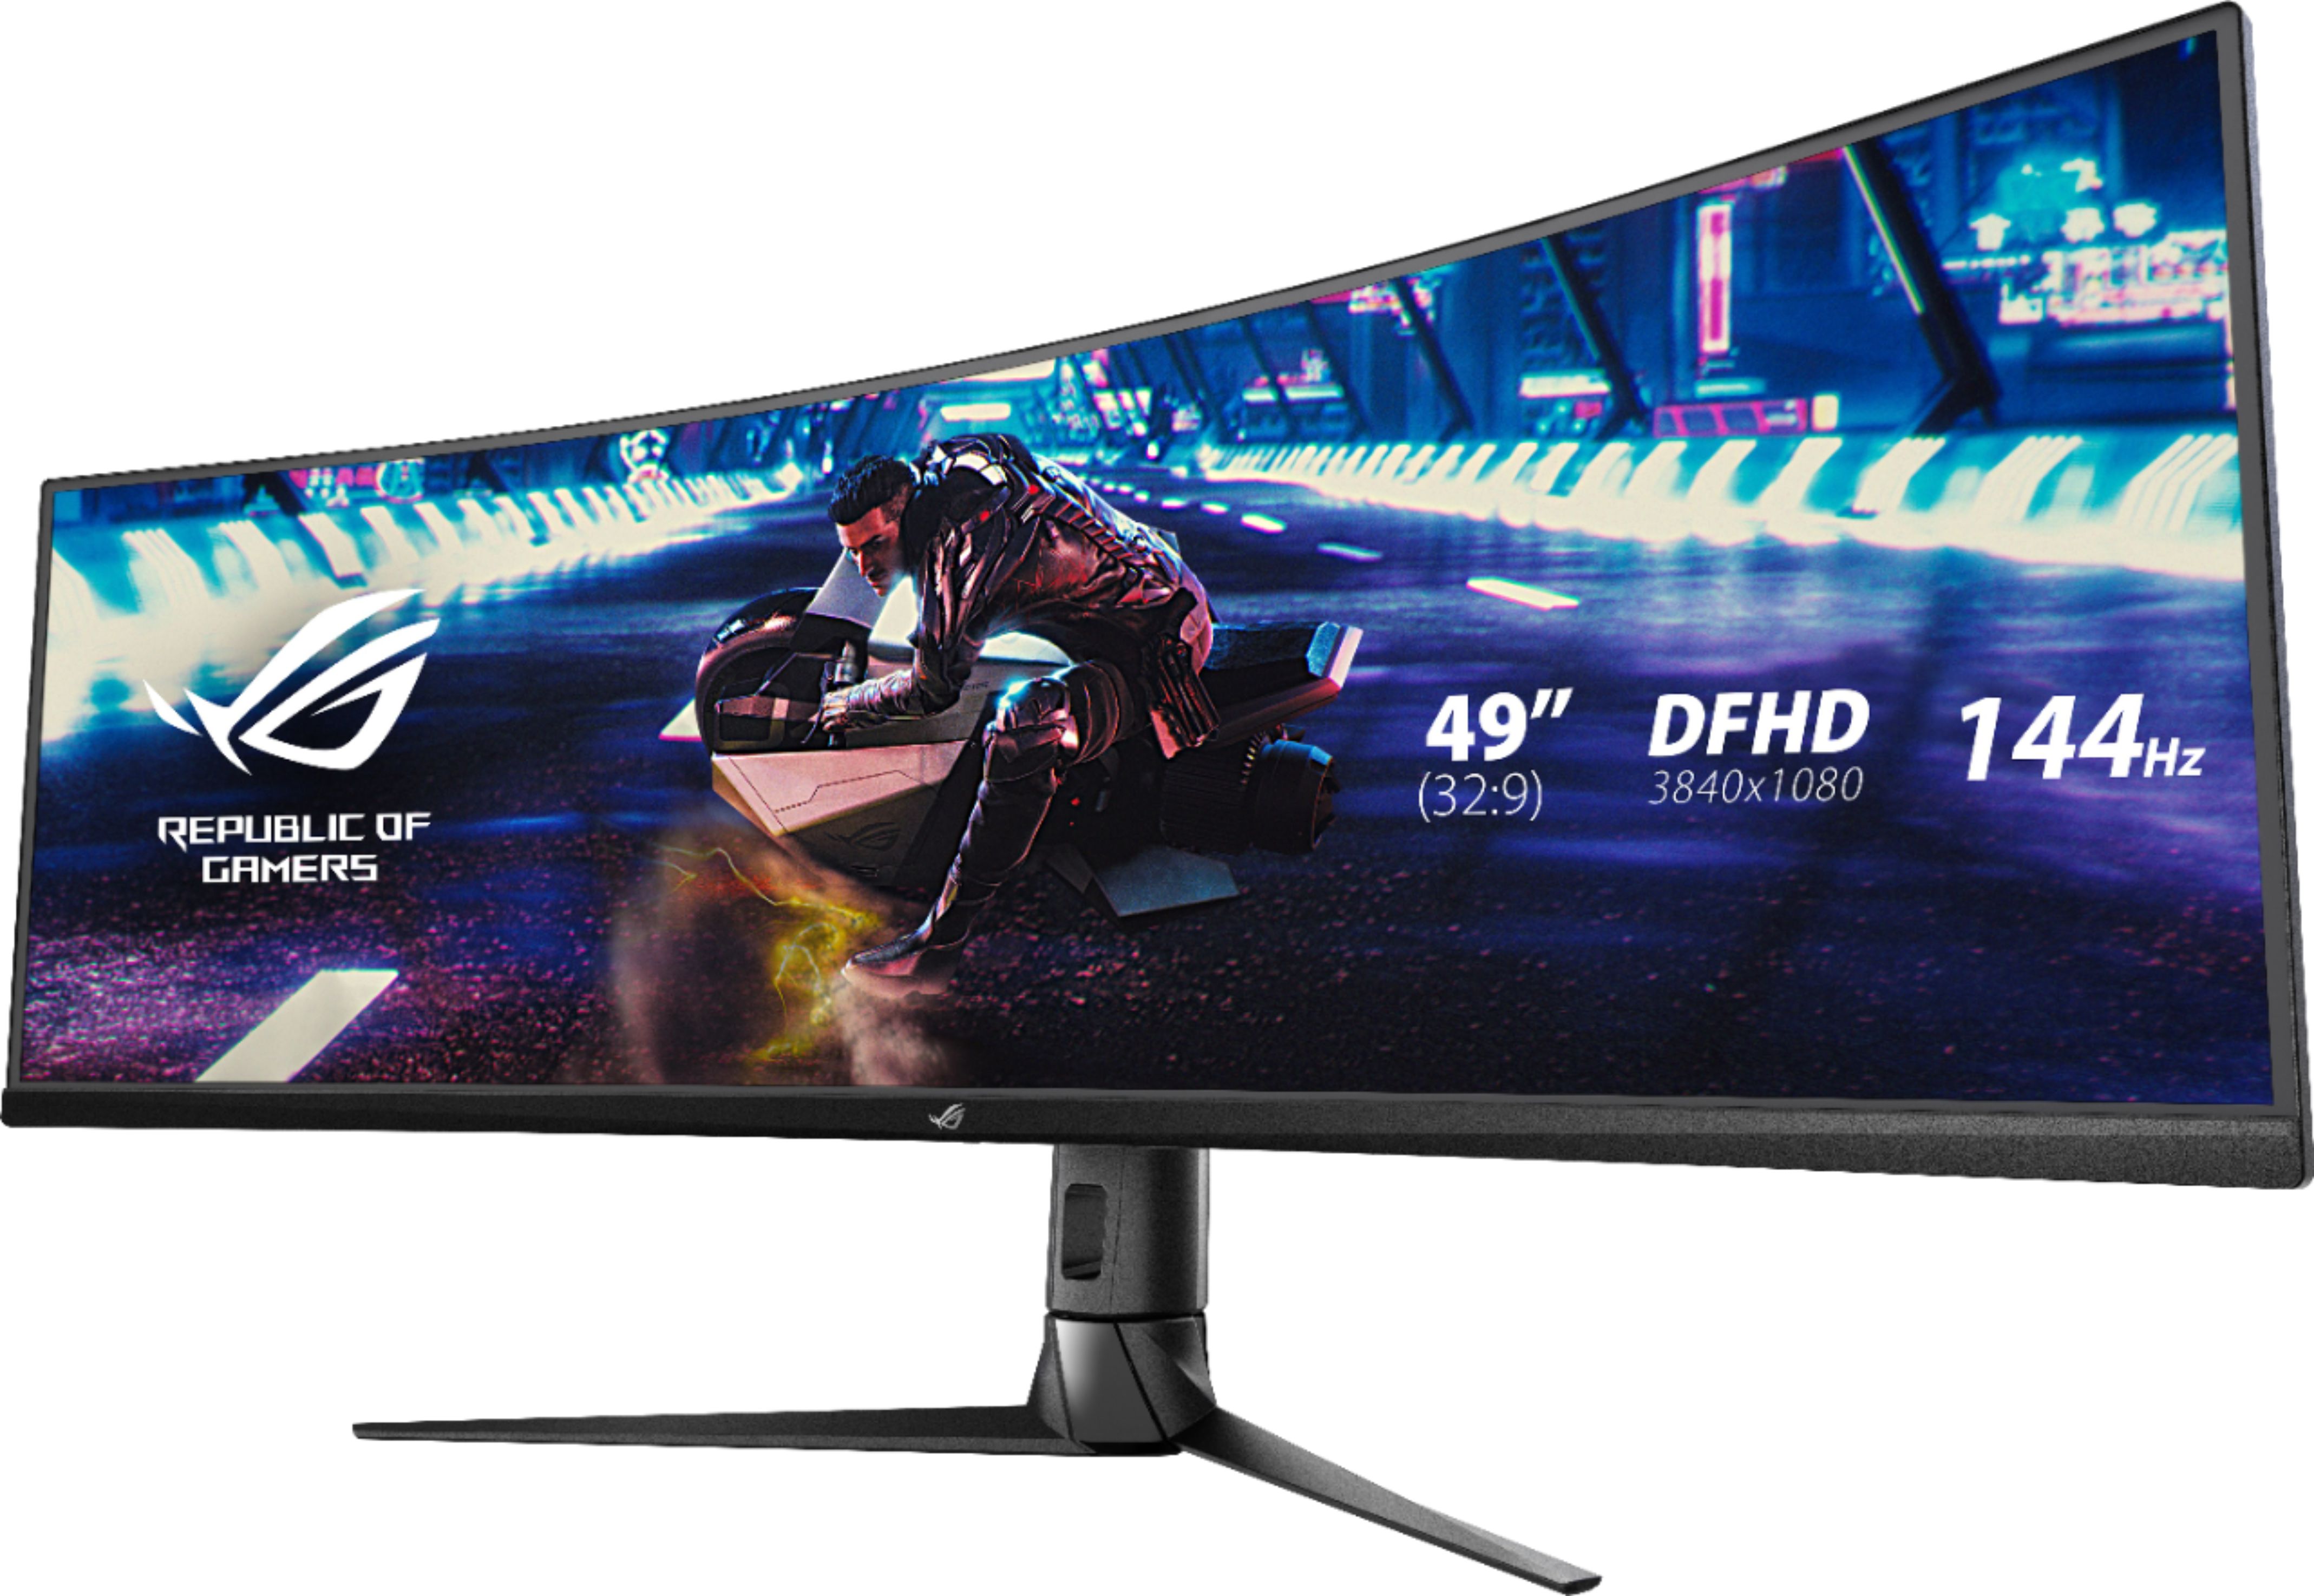 Left View: ASUS - Geek Squad Certified Refurbished 49" LED Curved FHD FreeSync Monitor with HDR - Black